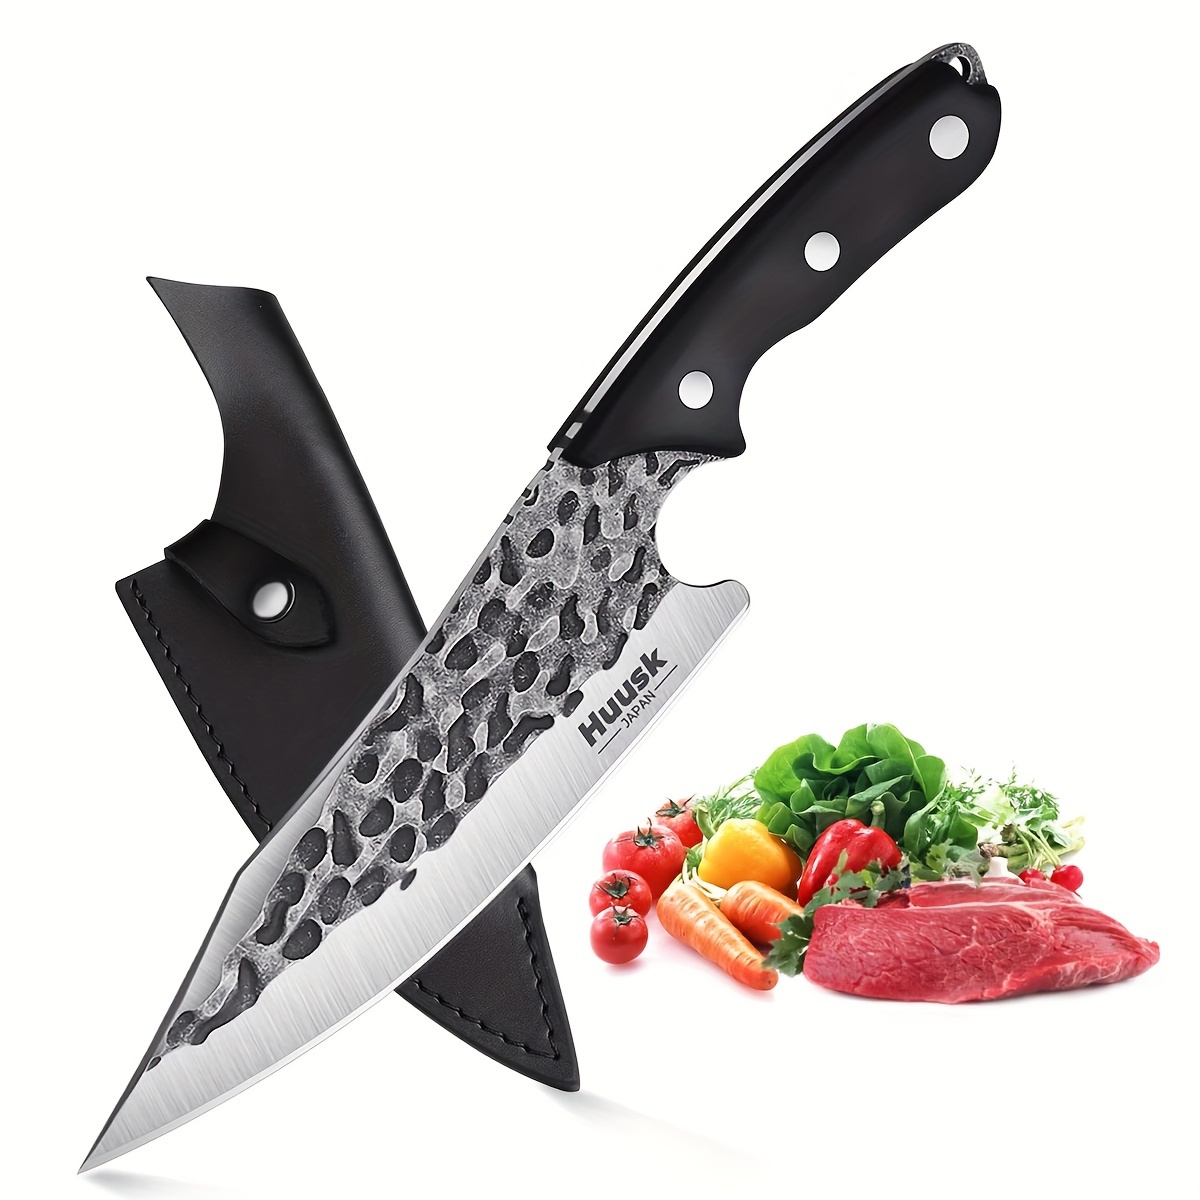 

Huusk Chef Knife With Sheath Viking Knife Forged From High Carbon Steel Boning Knife For Meat Cutting Full Tang Butcher Knife Outdoor Cooking Knife For Kitchen Or Camping Christmas Gift